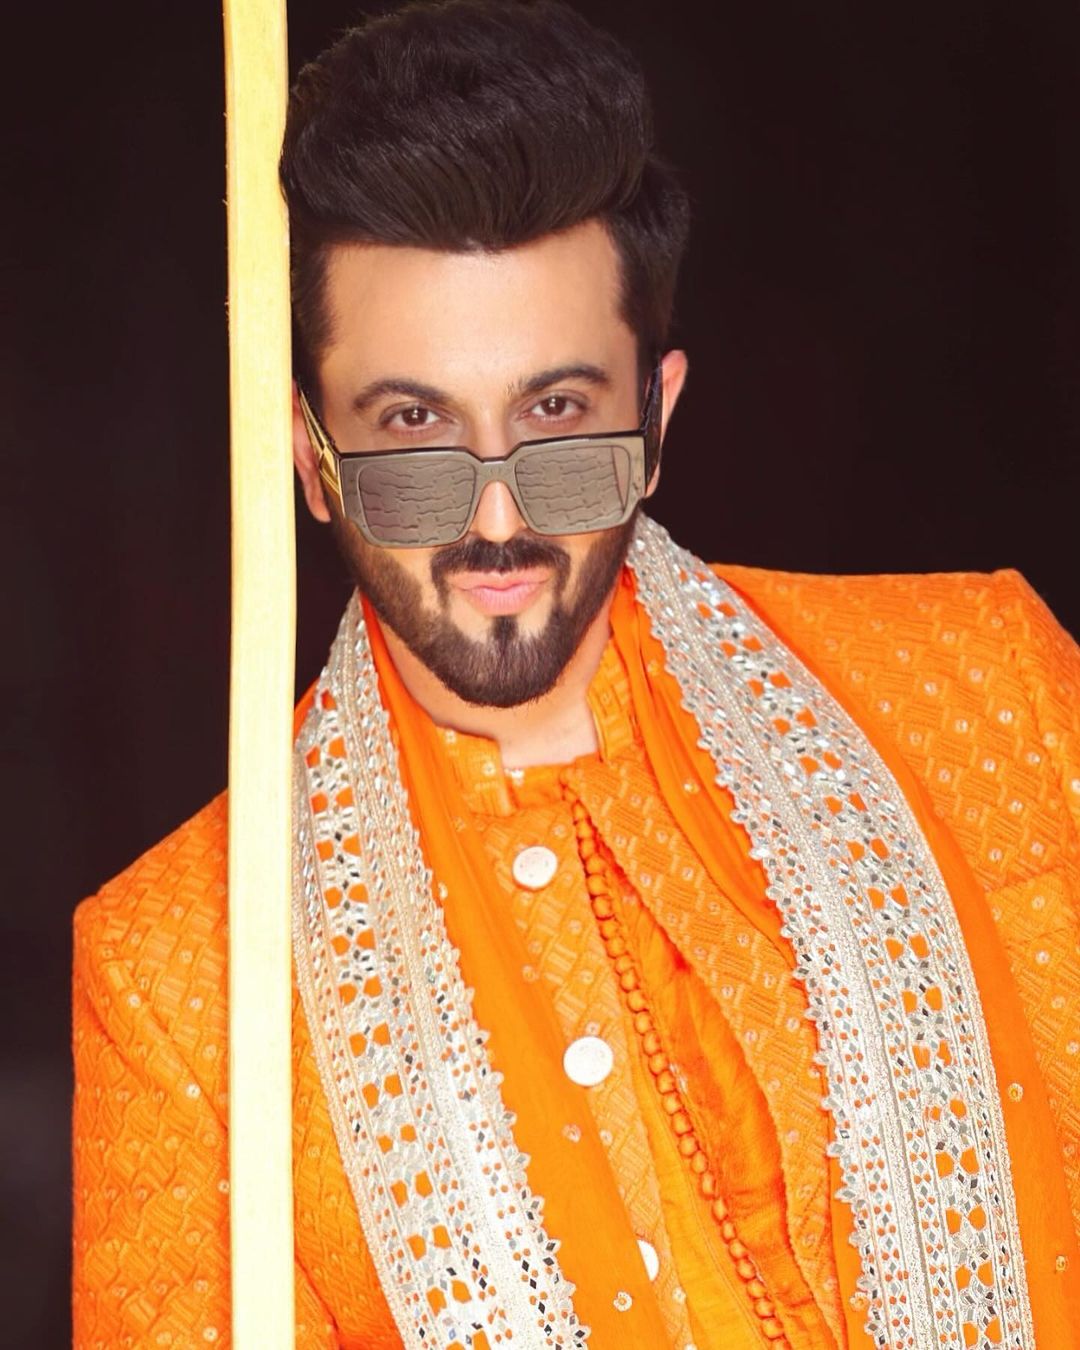 It’s Time To Recall Sasural Simar Ka! The Lead Actor Dheeraj Dhoopar Feel Proud About His Co-Star’s Performance!